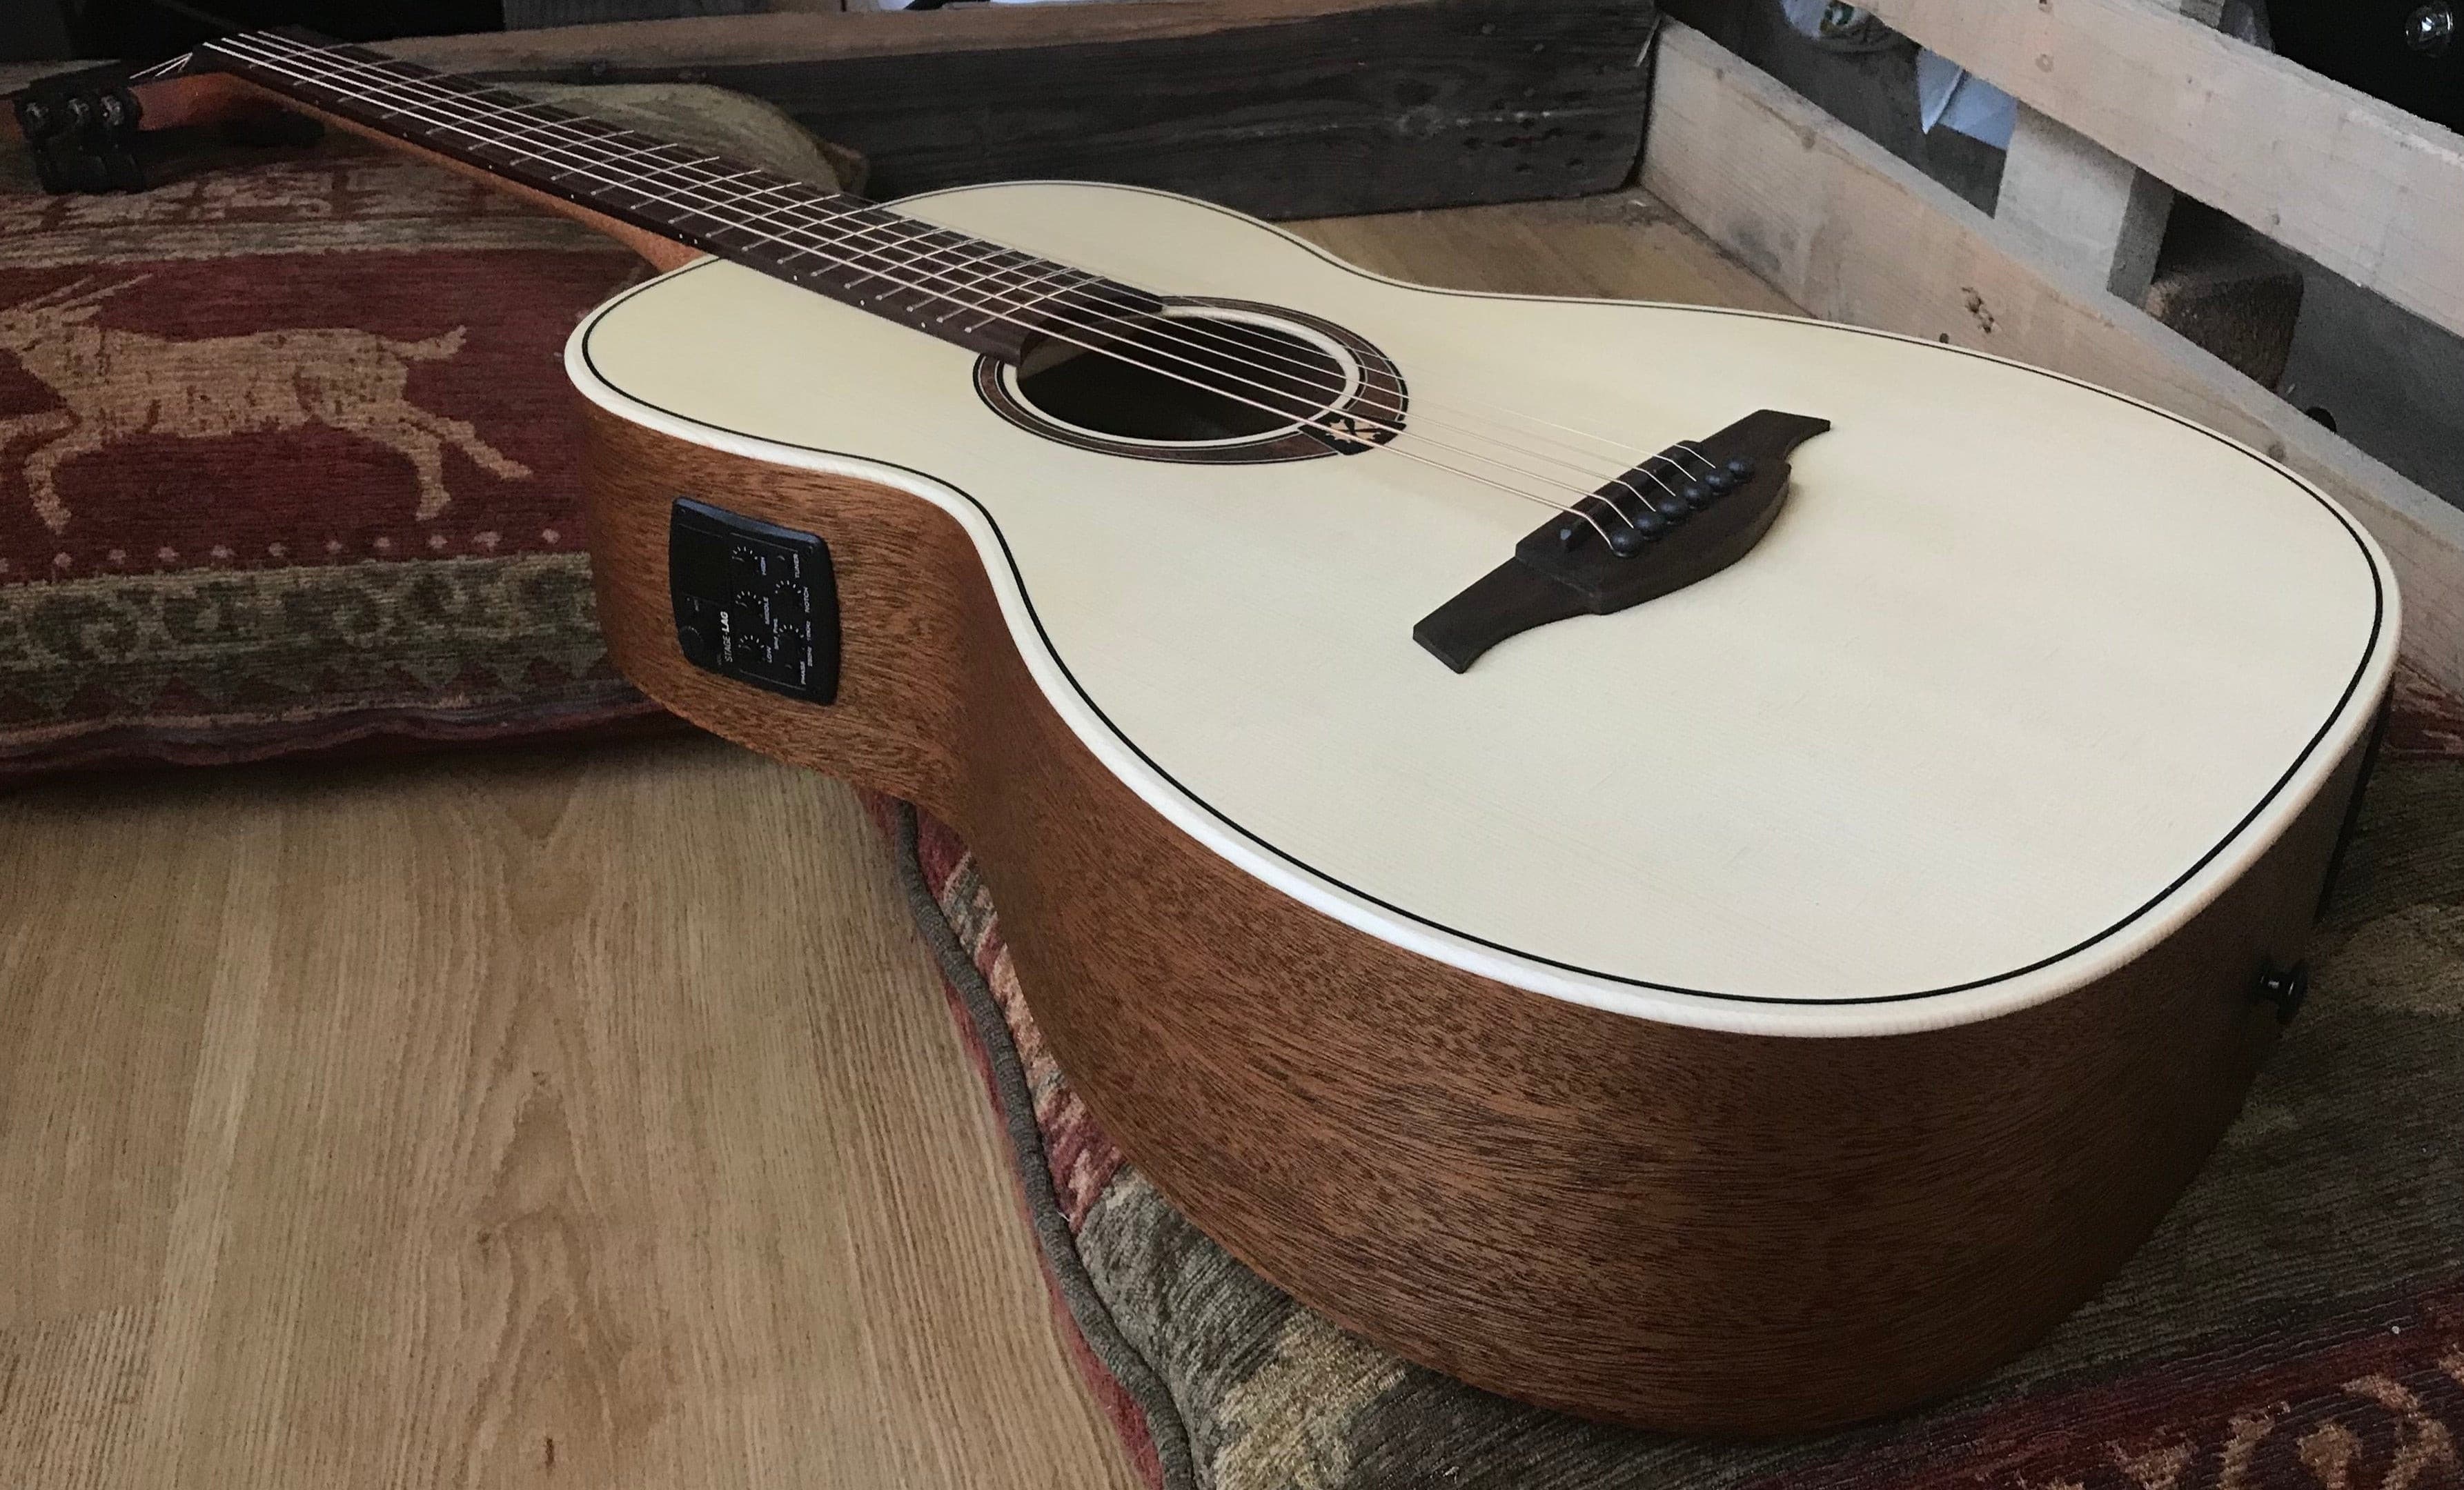 LAG T177PE Electro Acoustic Parlor - Stunning!, Electro Acoustic Guitar for sale at Richards Guitars.